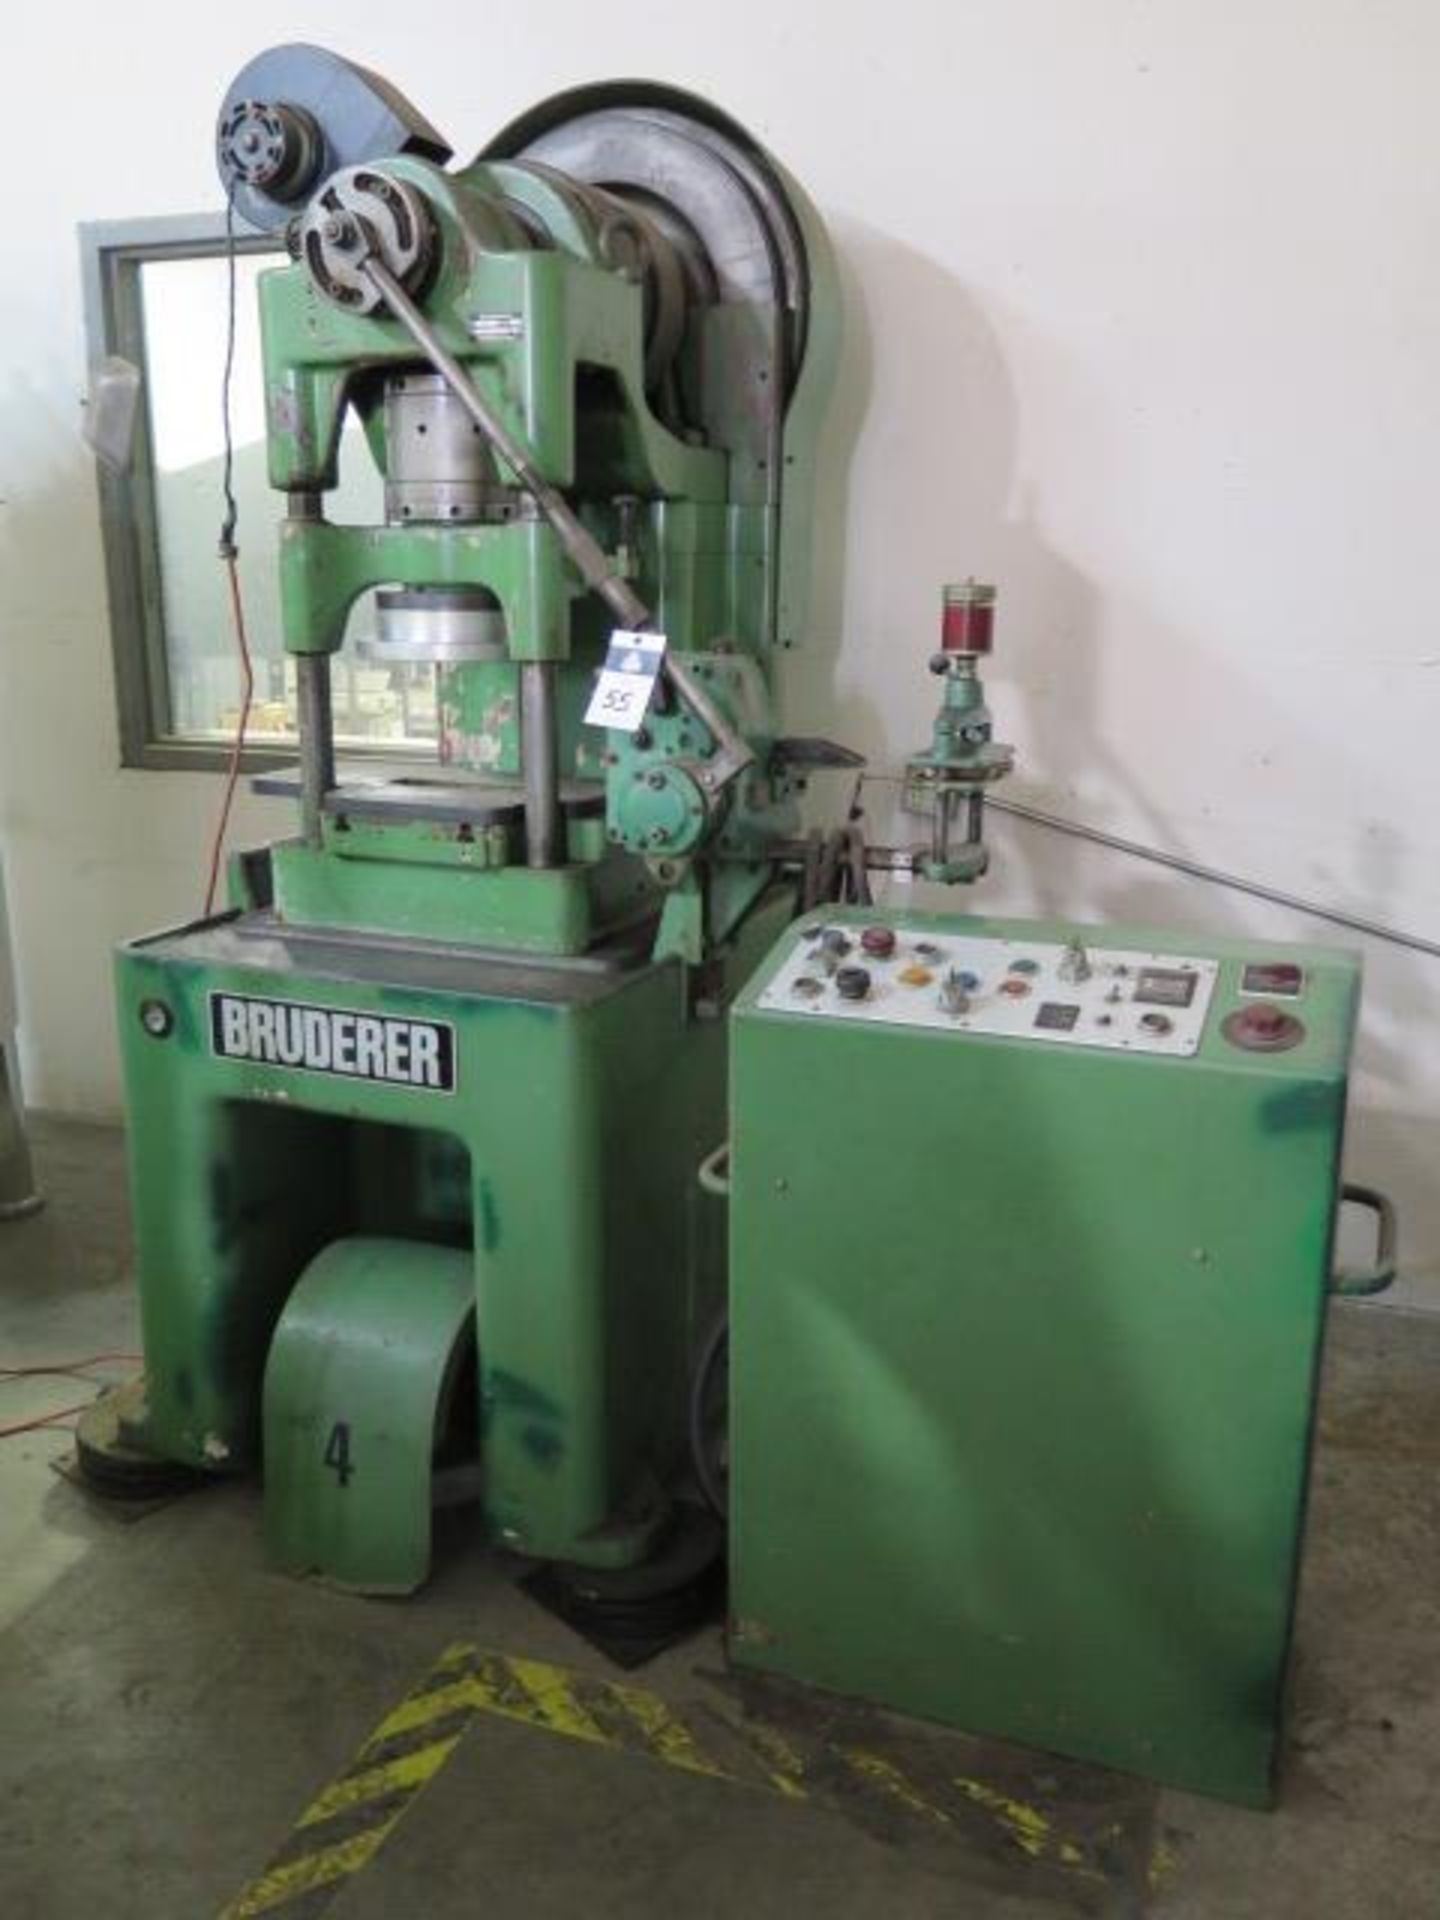 Bruderer BSTA-30 High Speed Stamping Machine s/n 2722 w/ Bruderer Controls, SOLD AS IS